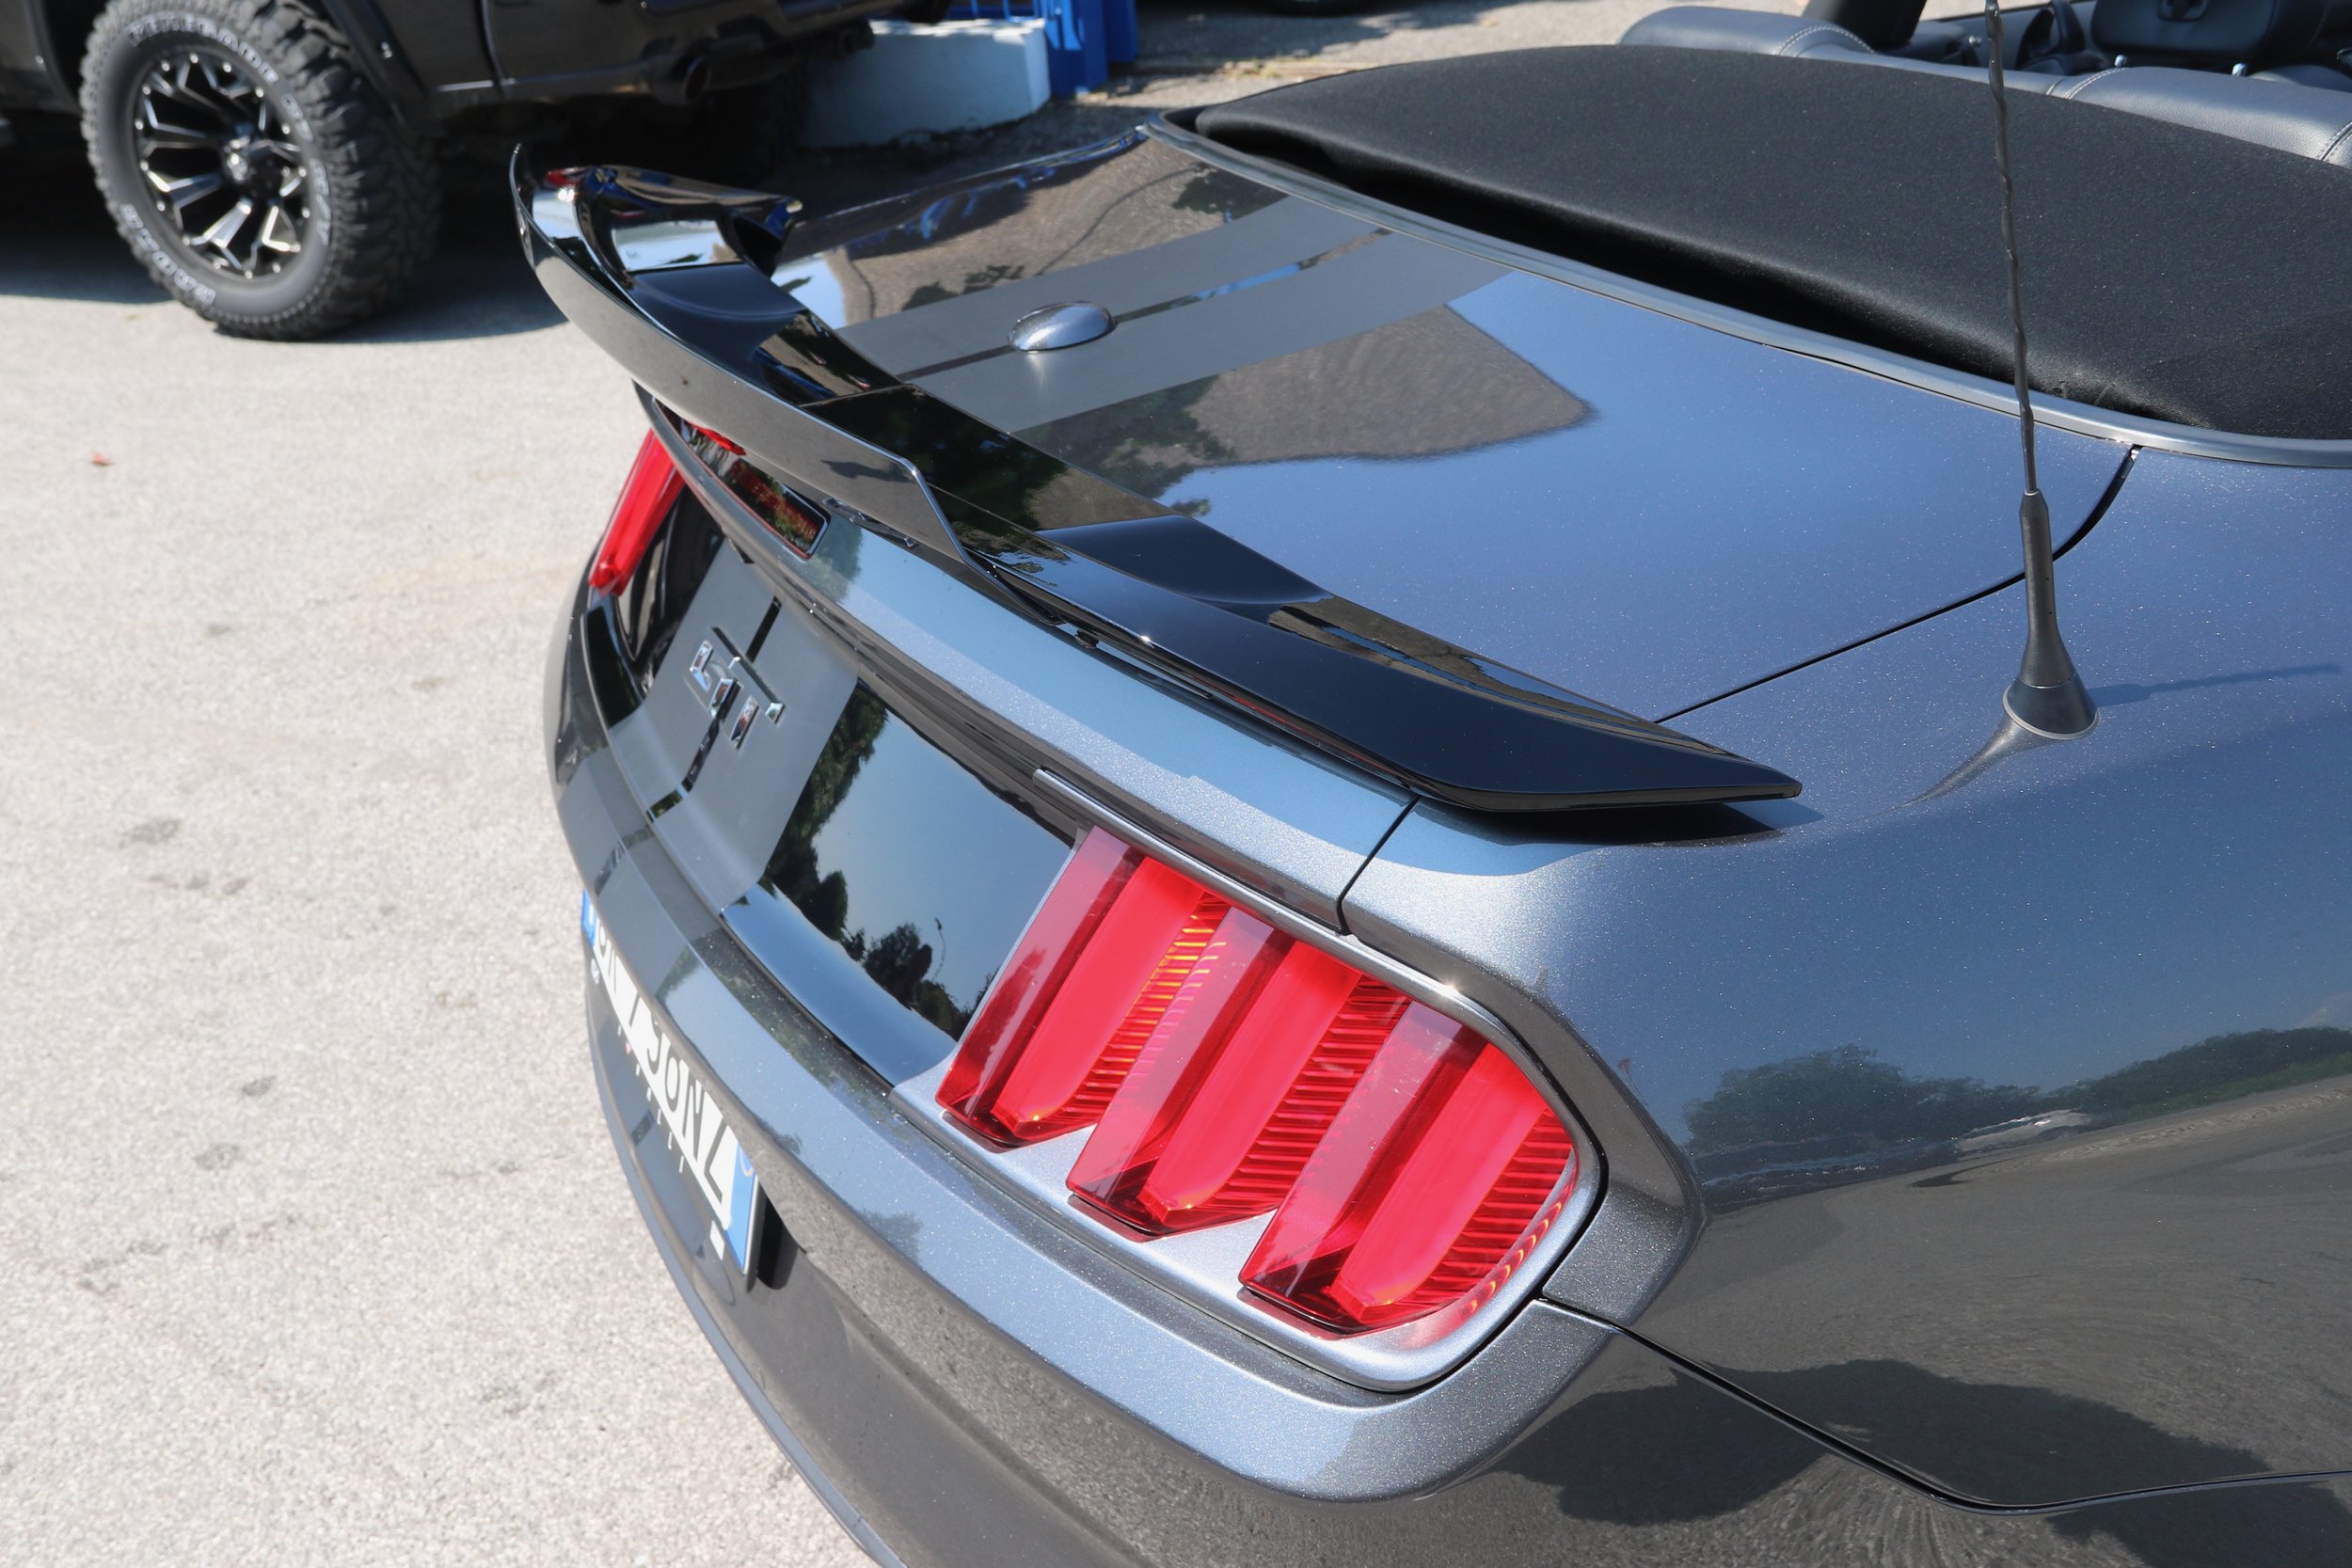 08 2015 Mustang GT 5.0L Coyote Convertible Marco Vignale.jpeg